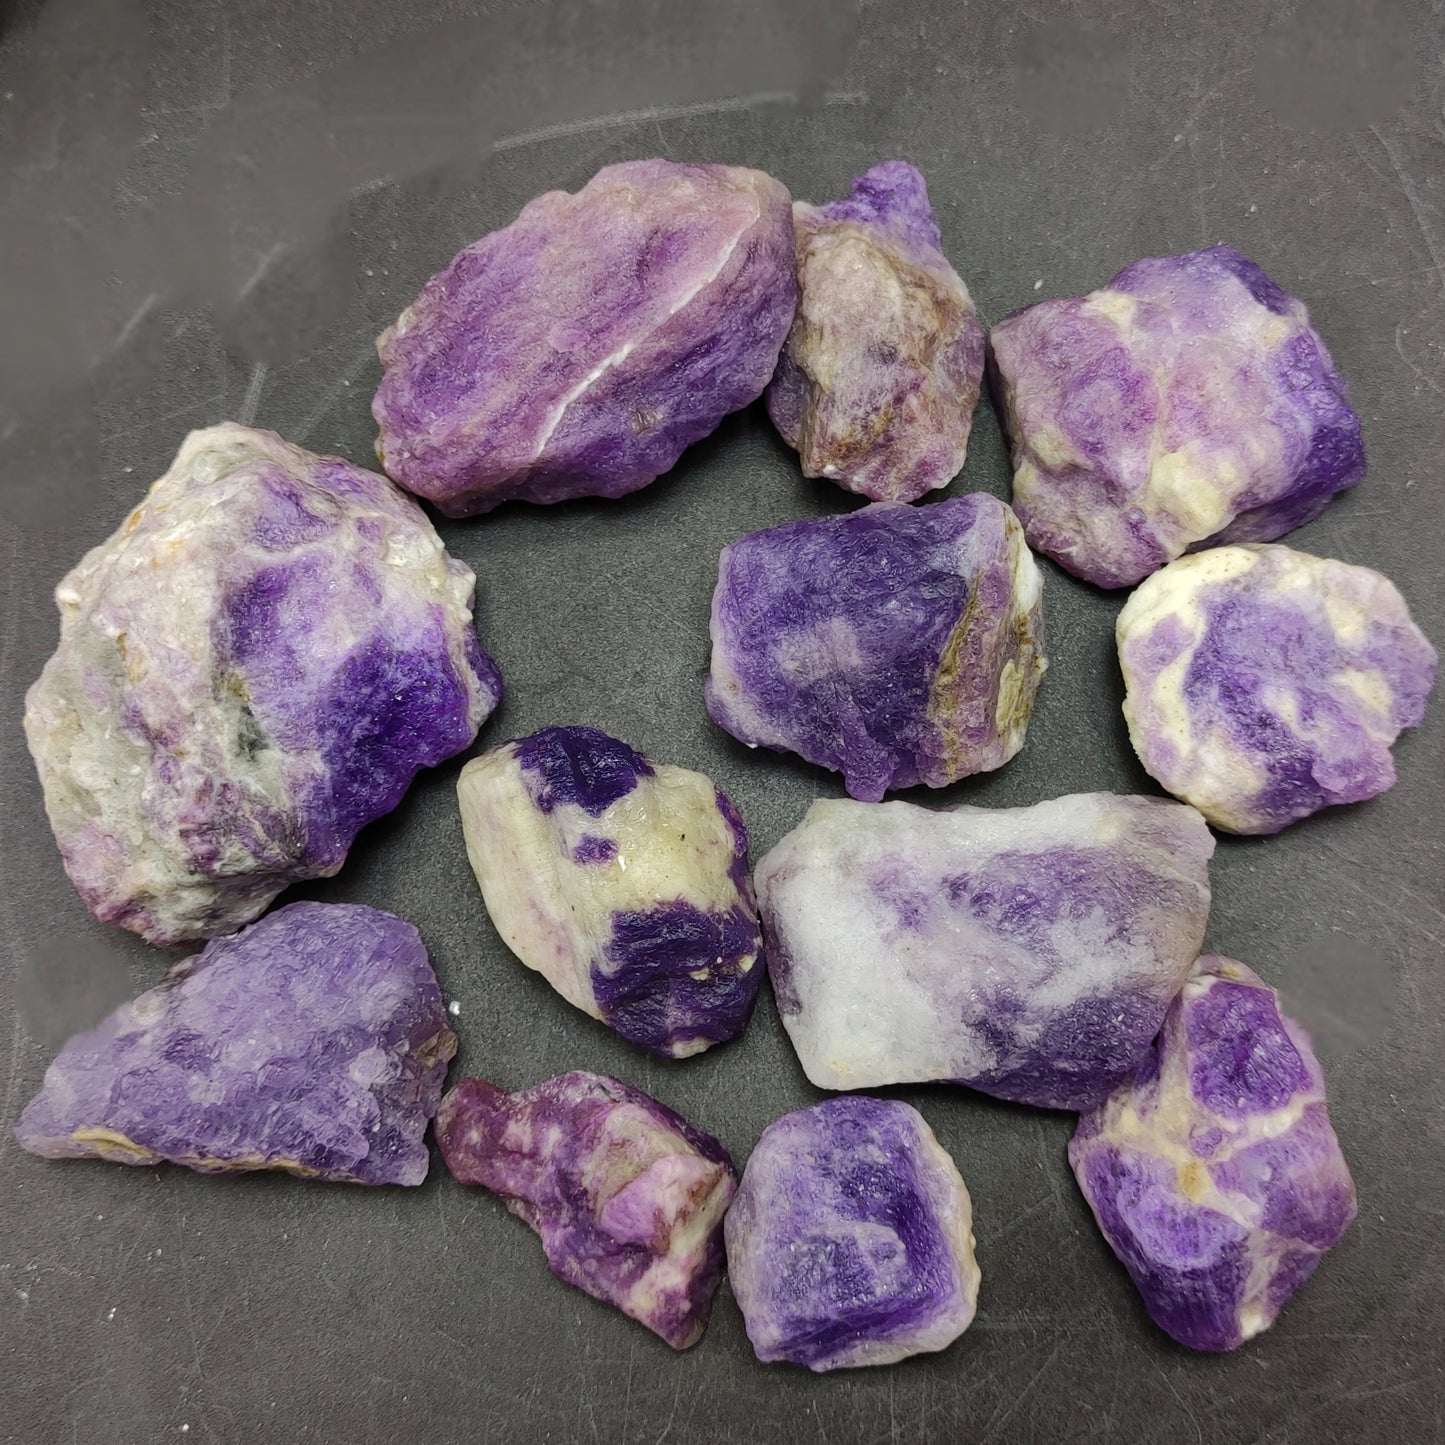 ARSAA GEMS AND MINERALSNatural 12 pieces small lot of UV reactive hackmanite crystals from Afghanistan, 253 grams - Premium Hackmanite Crystals from ARSAA GEMS AND MINERALS - Just $300! Shop now at ARSAA GEMS AND MINERALS